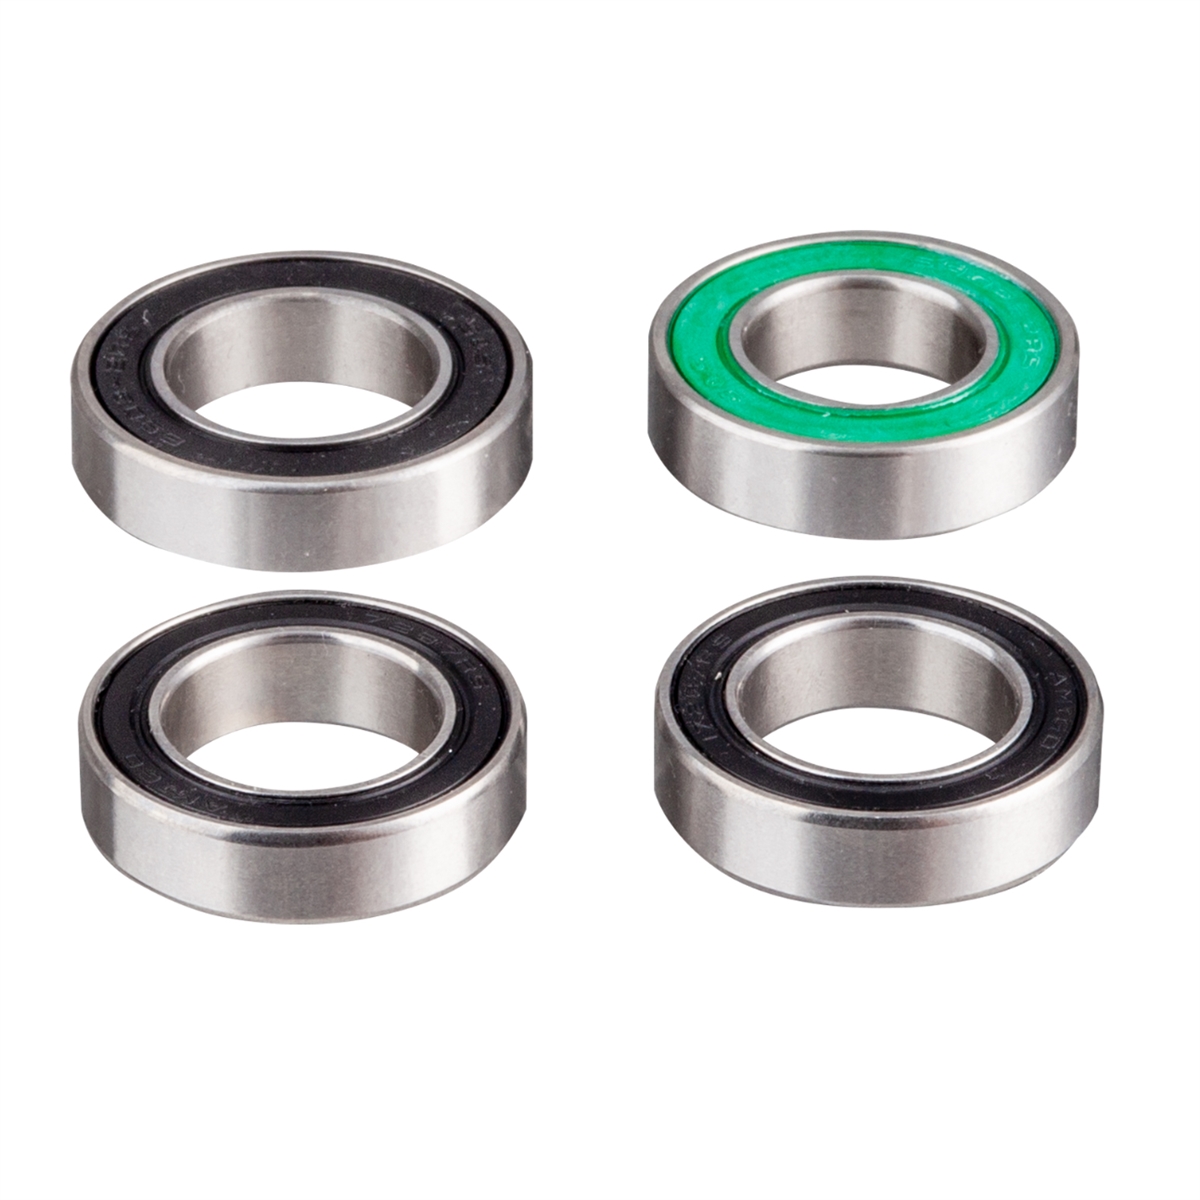 Replacement bearing kit for Hex HG / HGR rear hubs